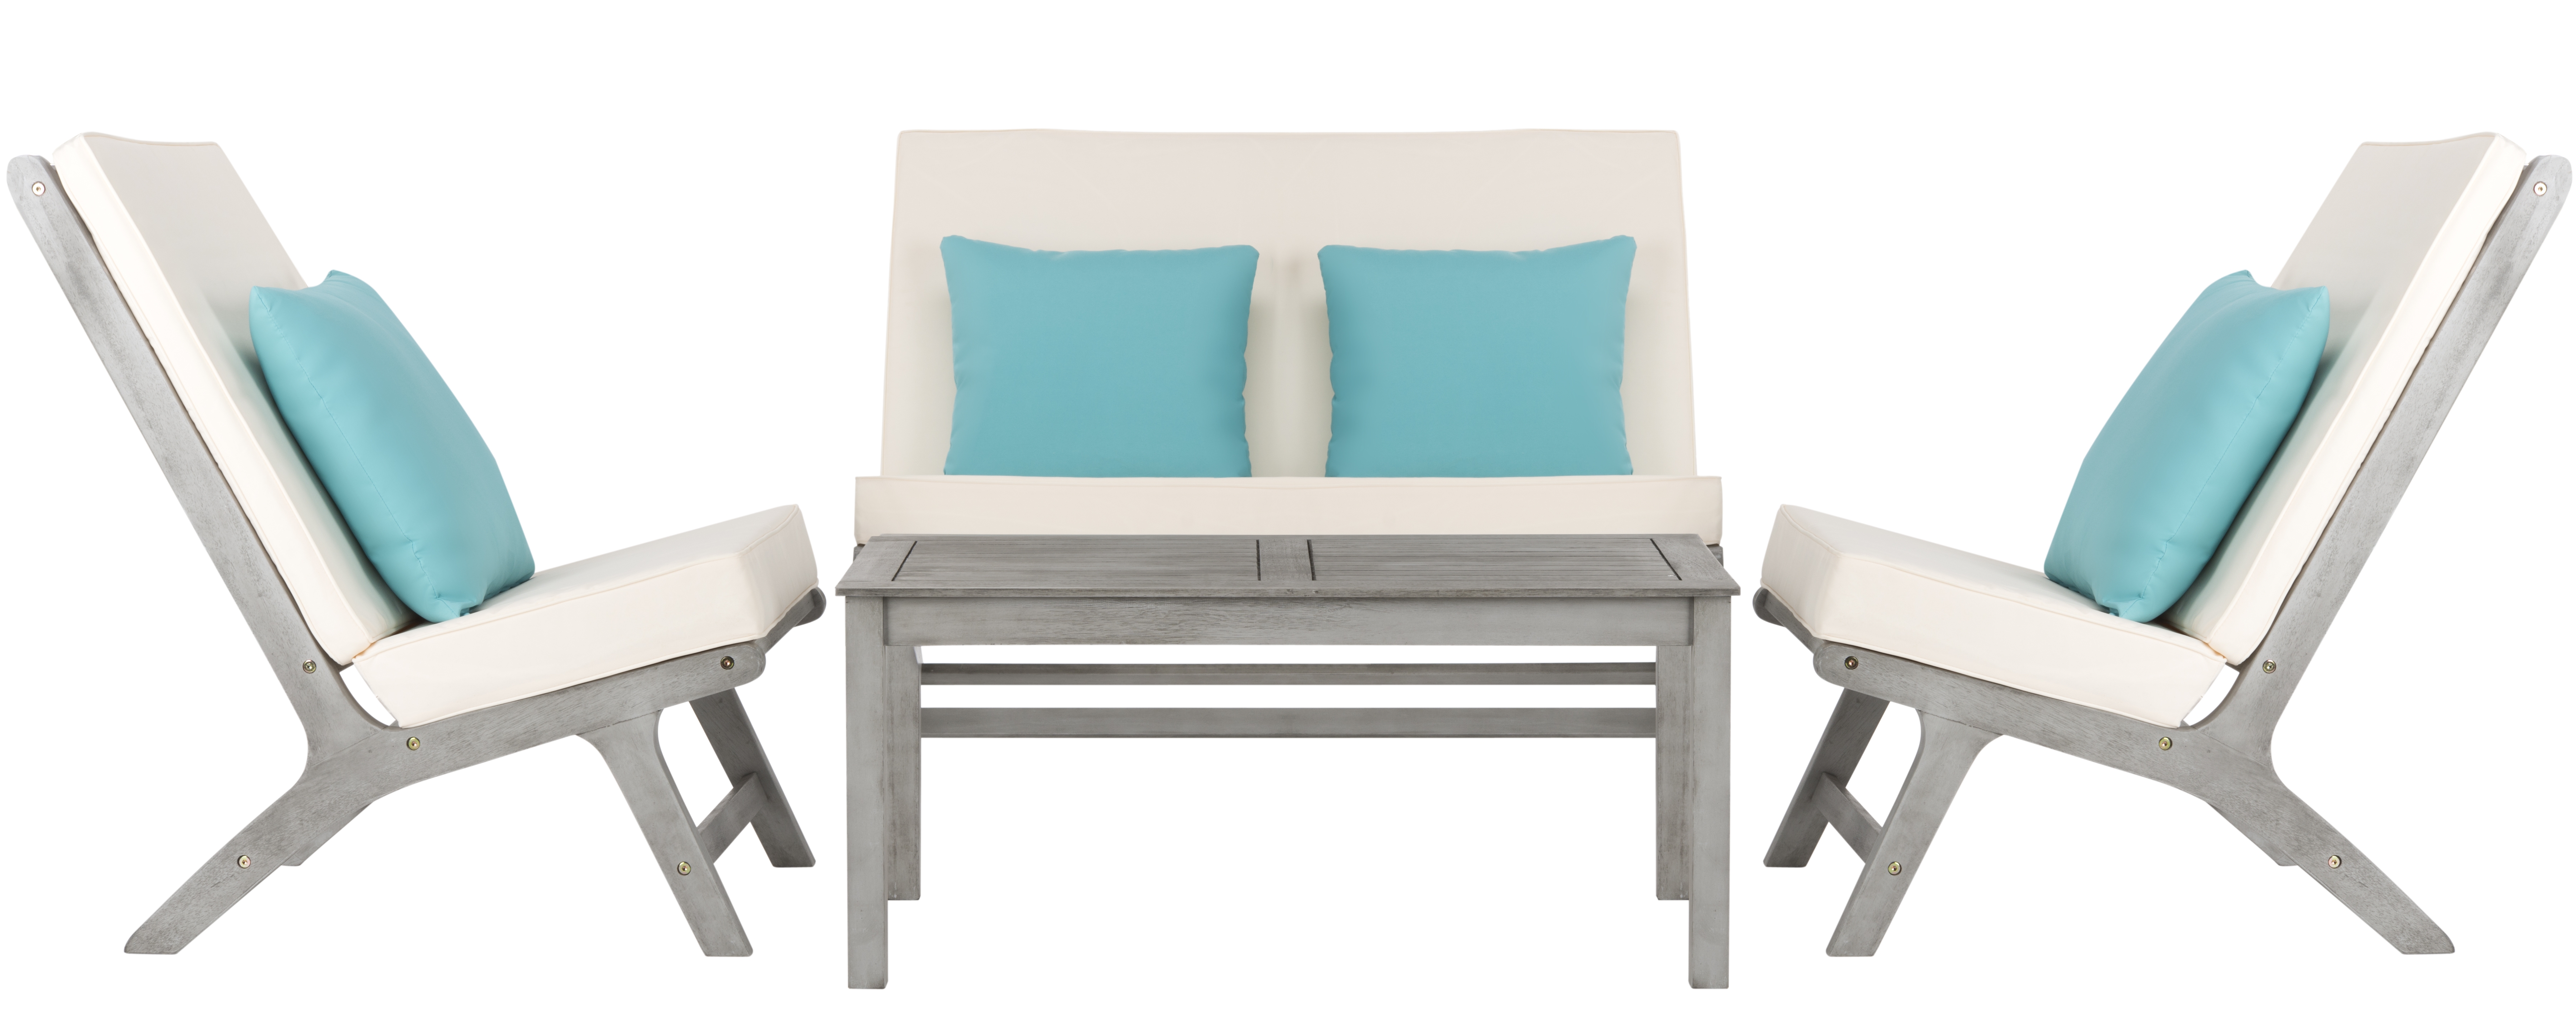 Chaston 4 Pc Outdoor Living Set With Accent Pillows - Grey Wash/White/Light Blue - Arlo Home - Image 1